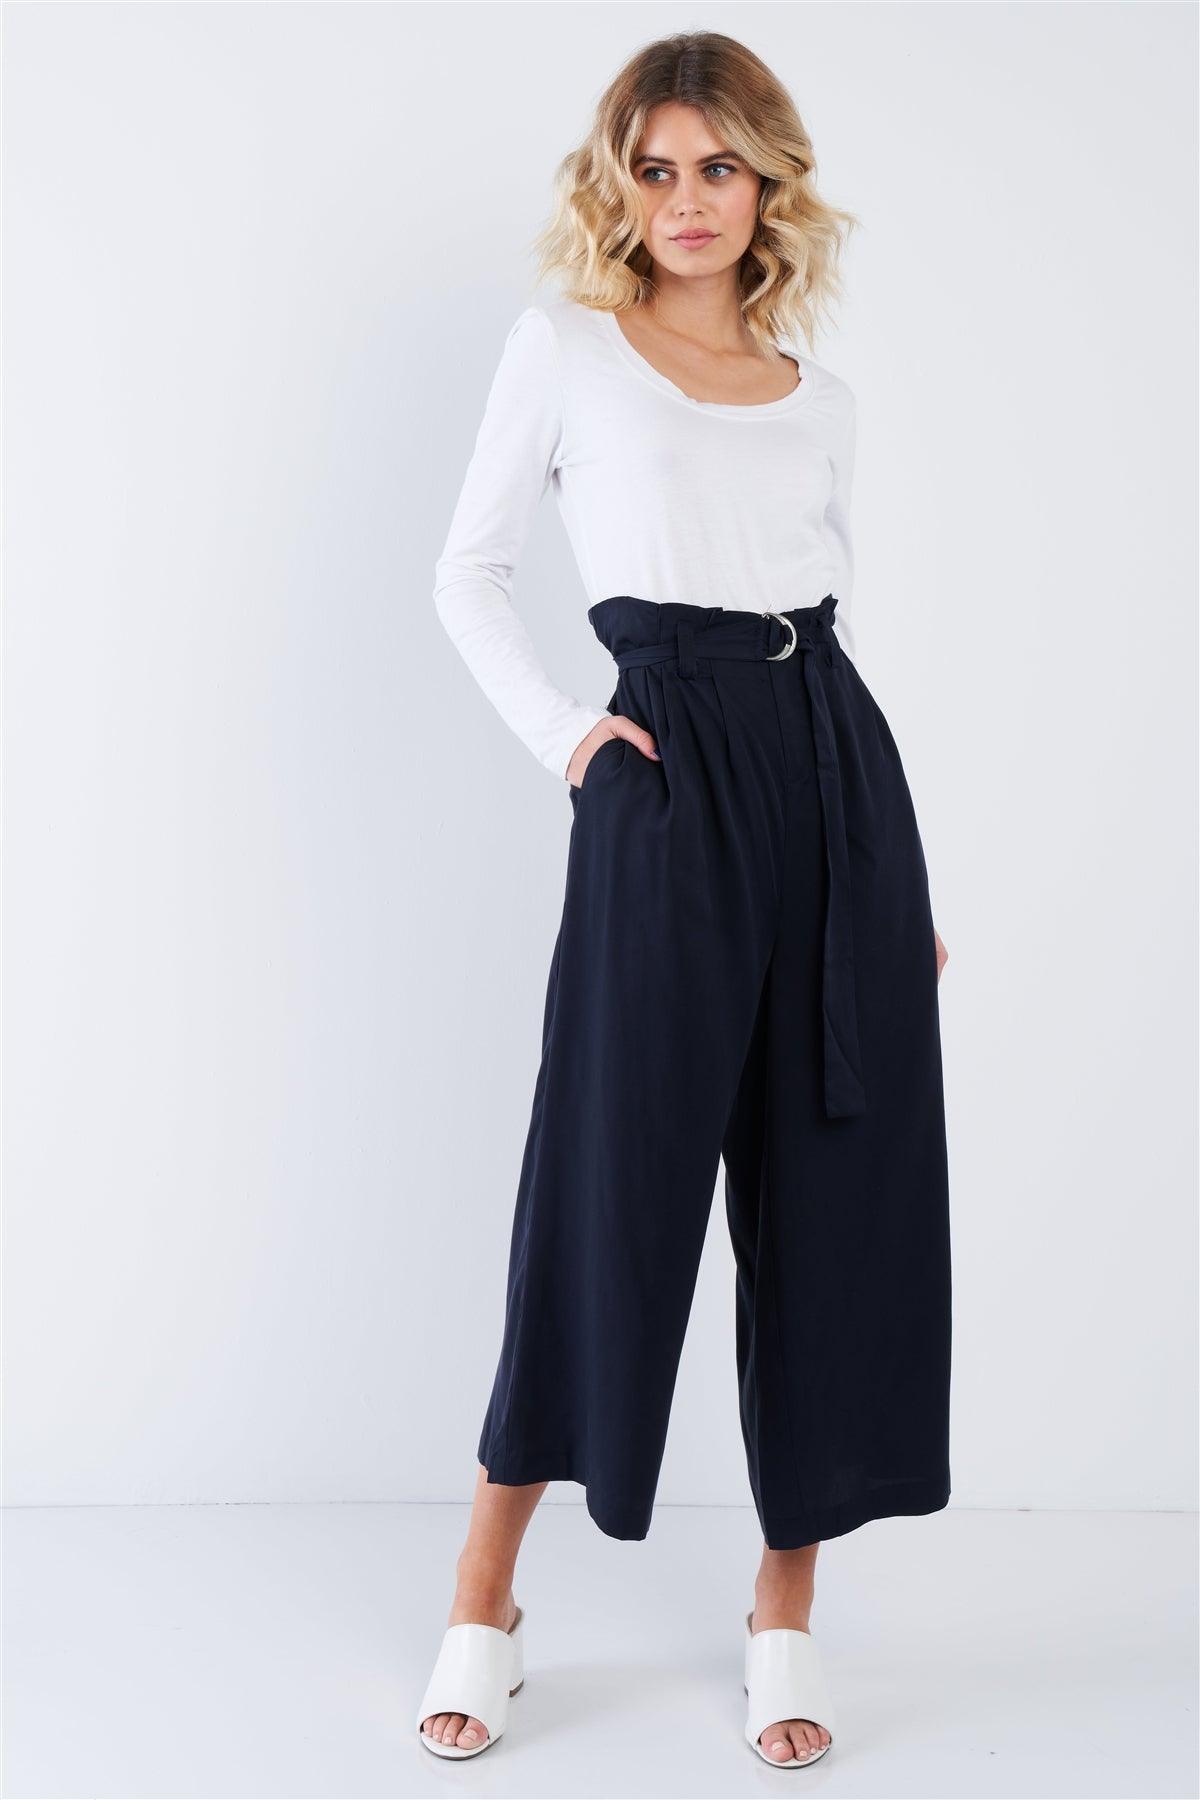 Navy High Waisted Wide Leg Office Chic Gaucho Pants  /3-2-1